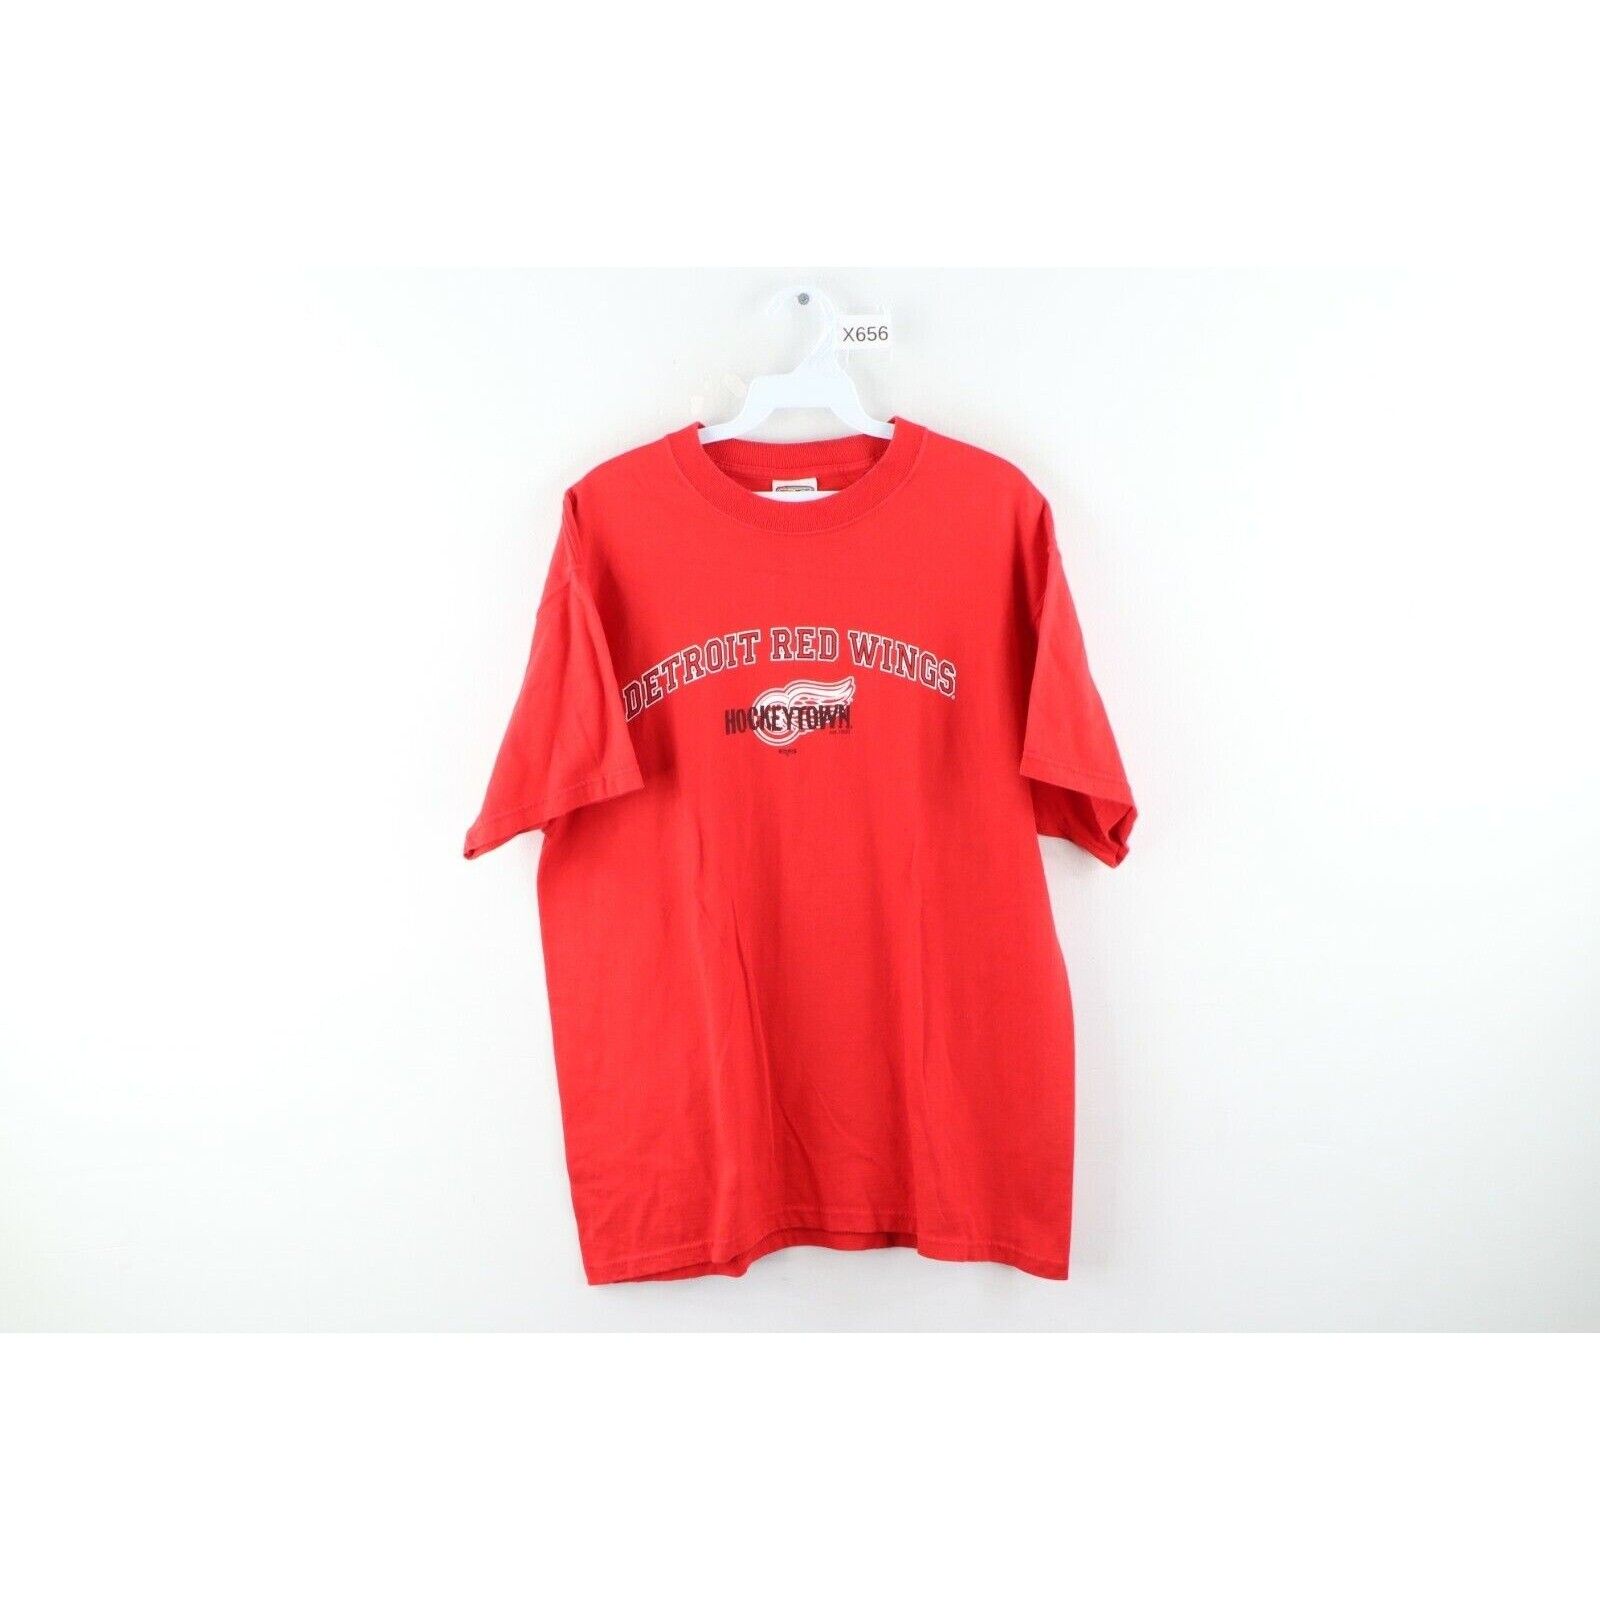 Vintage Vintage 90s Detroit Red Wings Hockey Spell Out T-Shirt Size US L / EU 52-54 / 3 - 1 Preview